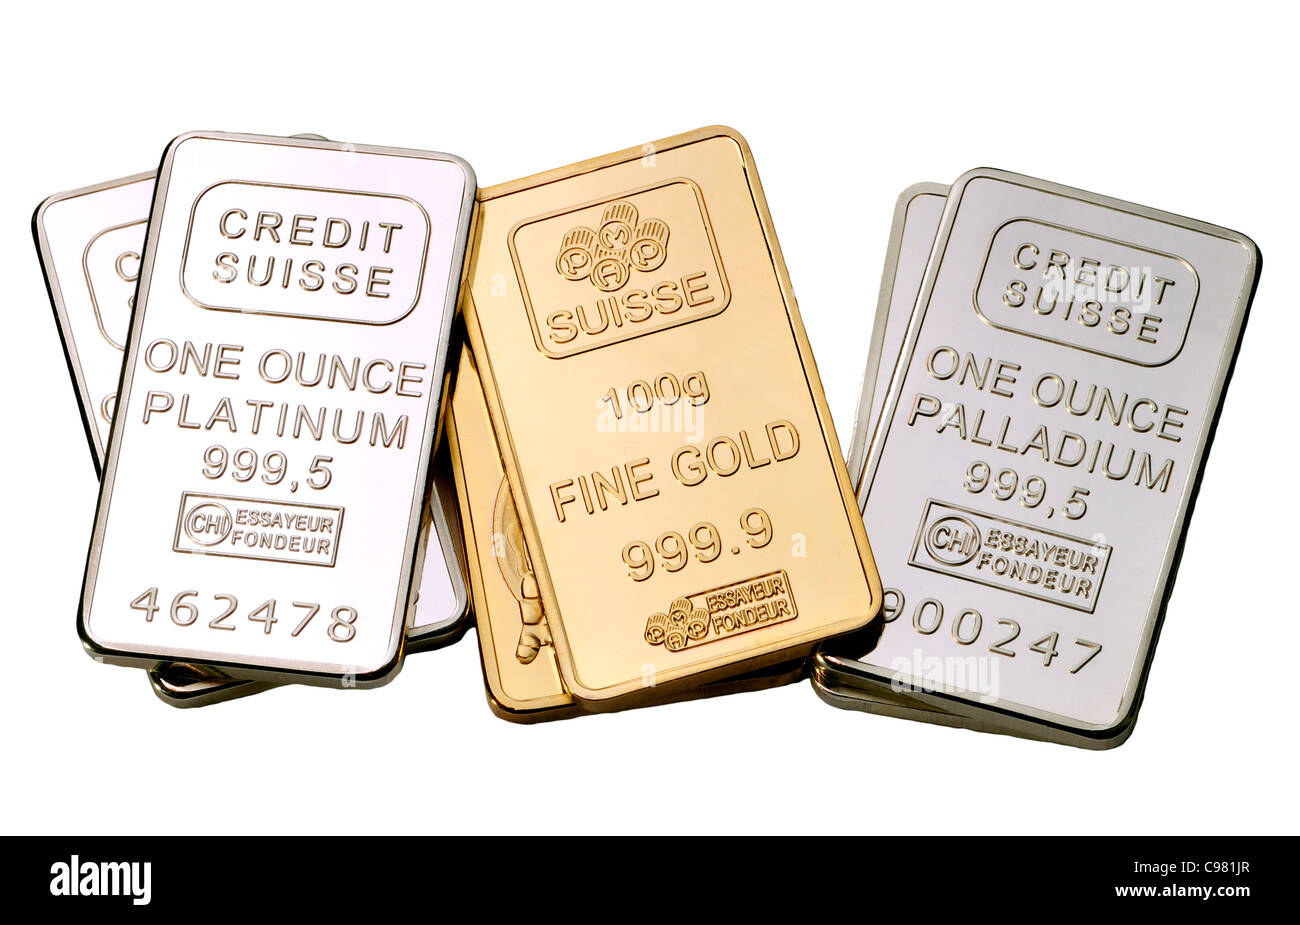 Gold, Platinum and Palladium bullion in 1oz bars / ingots (plated replicas) Cut-out Stock Photo